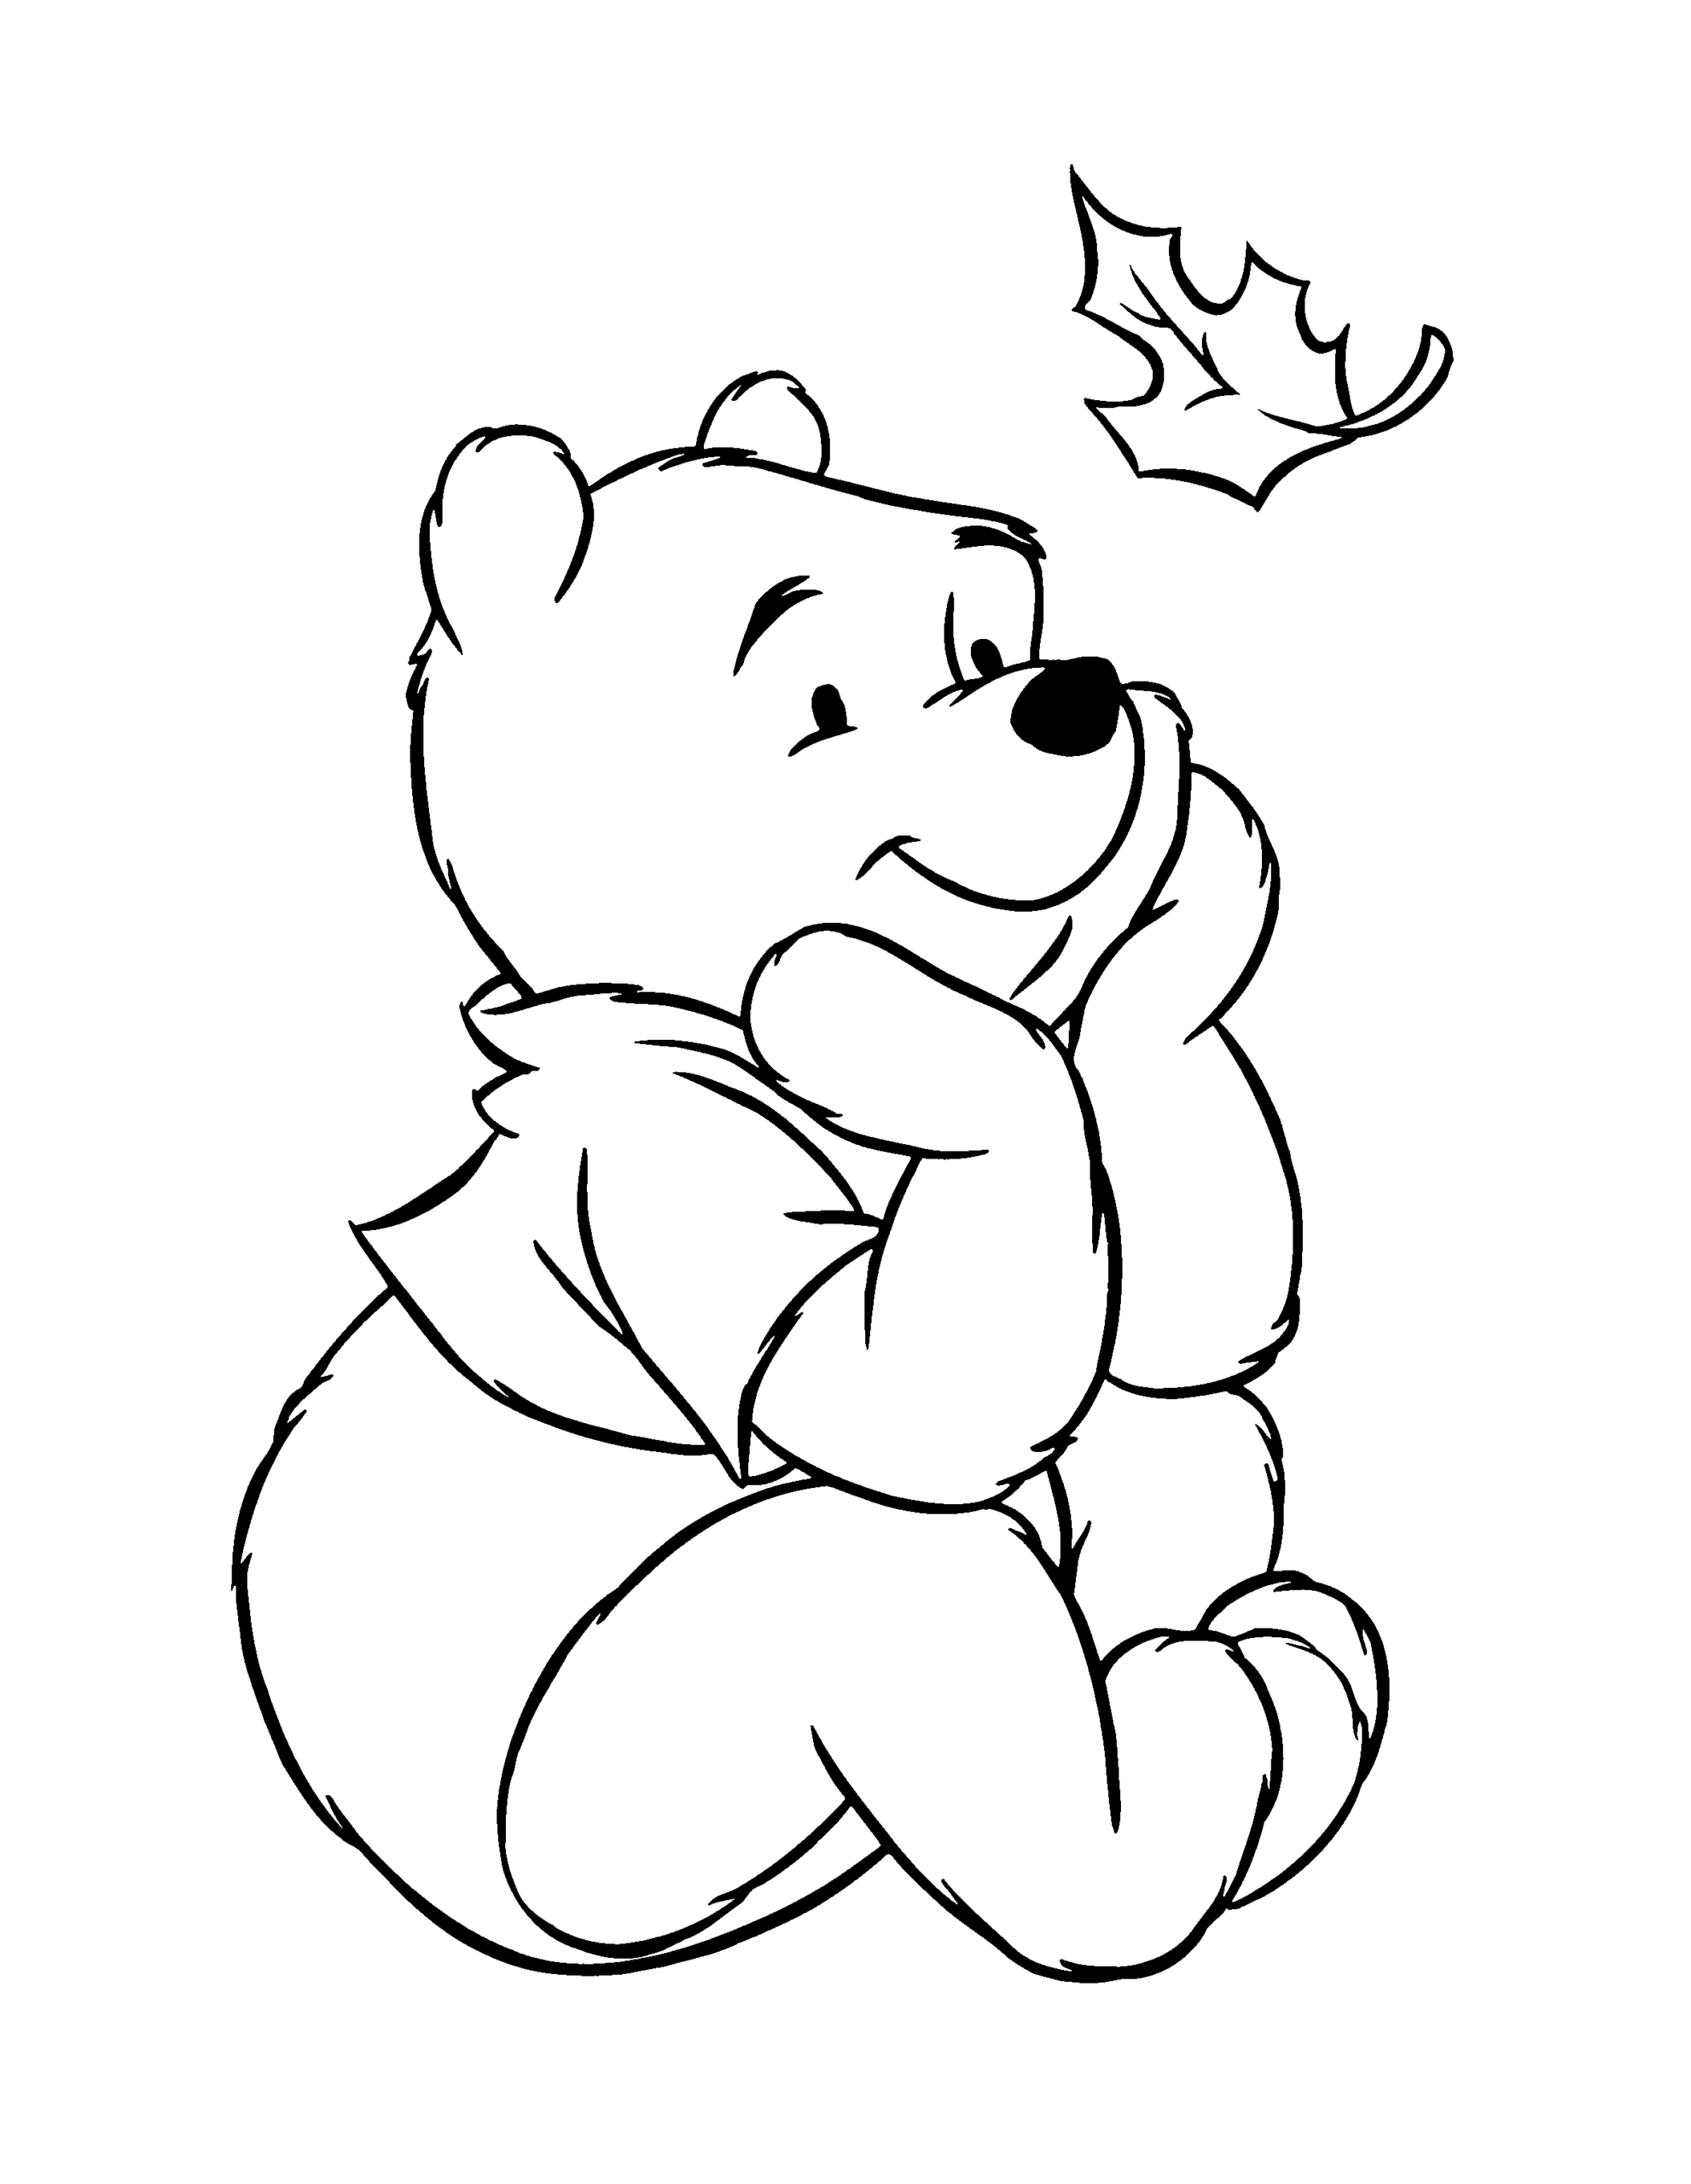 Winnie the Pooh Coloring Pages Cartoons winnie the pooh 46 Printable 2020 7155 Coloring4free